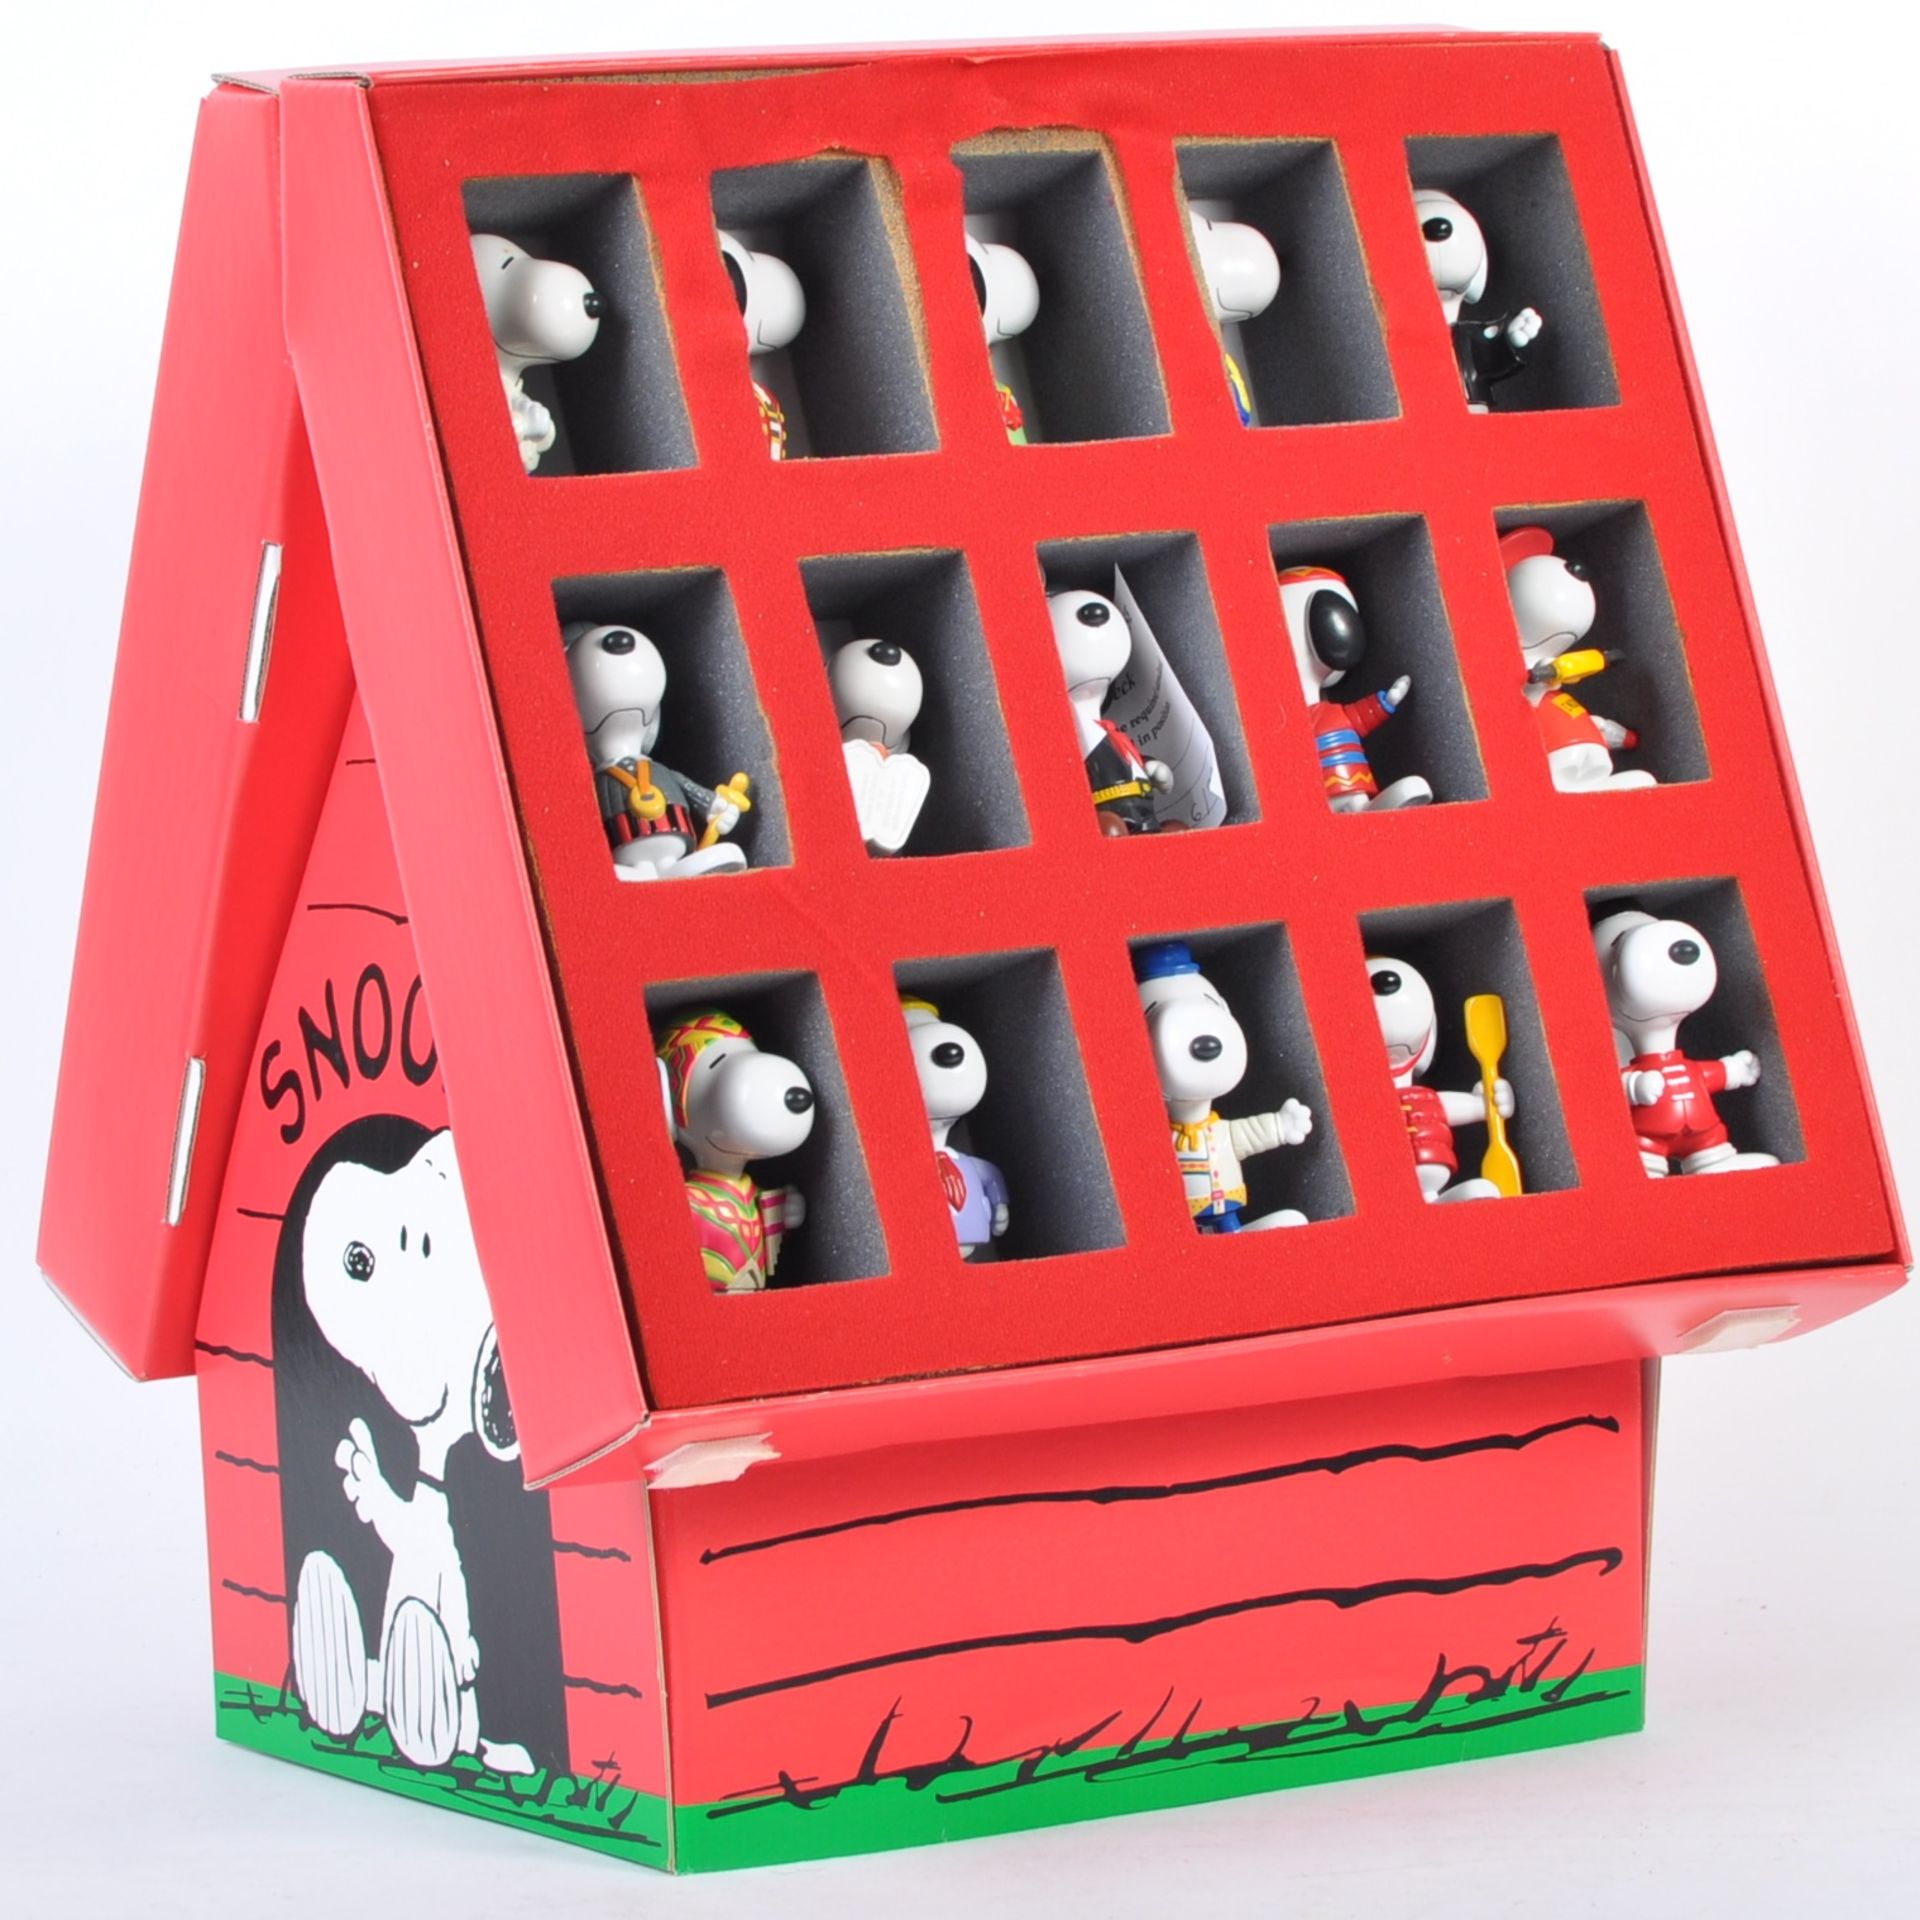 RARE MCDONALDS HAPPY MEAL SNOOPY COLLECTORS BOX SET WITH THIRTY FIGURES